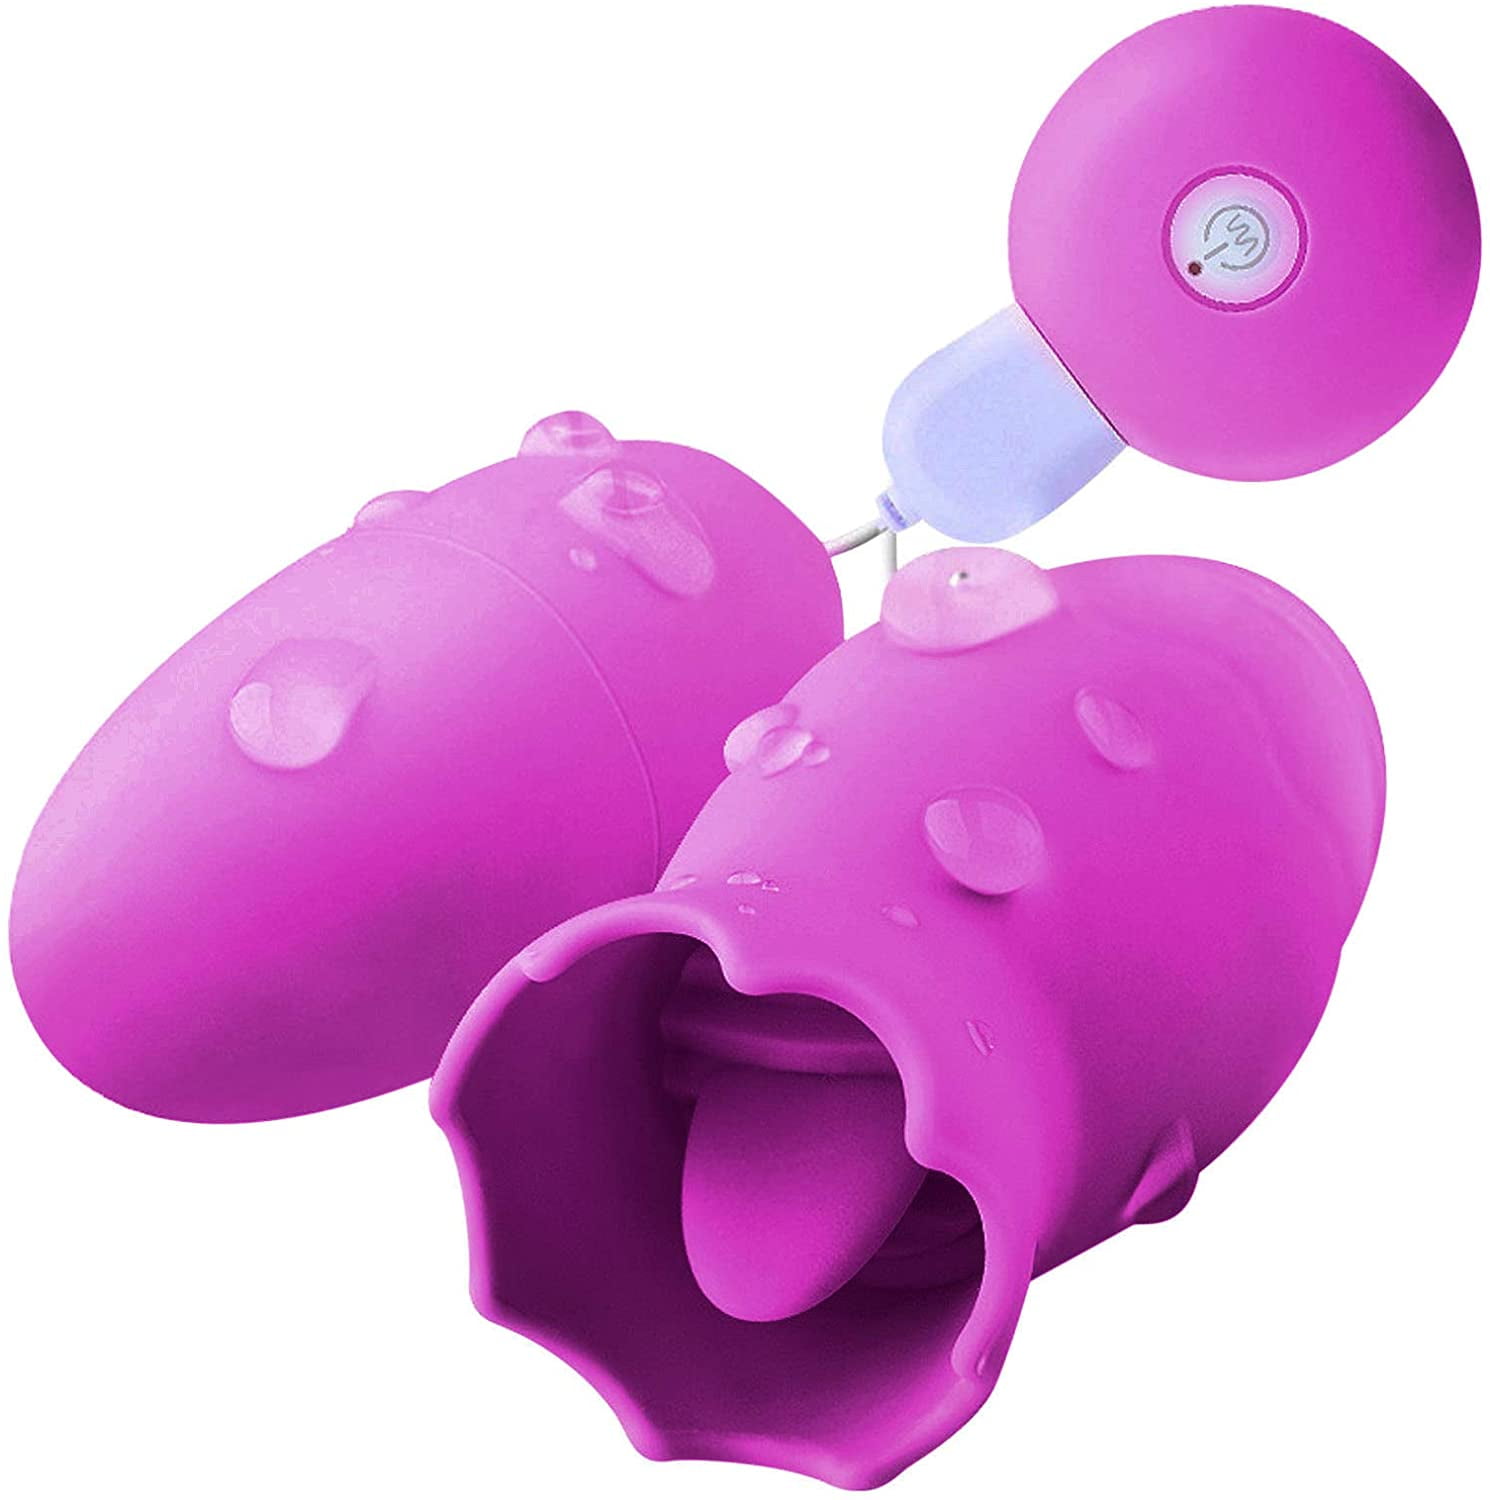 Clit Nipple Stimulator Vibrators for Women, Multi Vibration and Tongue Licking Modes Female Adult Sex Toys for Women, G Spot Clitoral Waterproof Sexual Pleasure Tools image